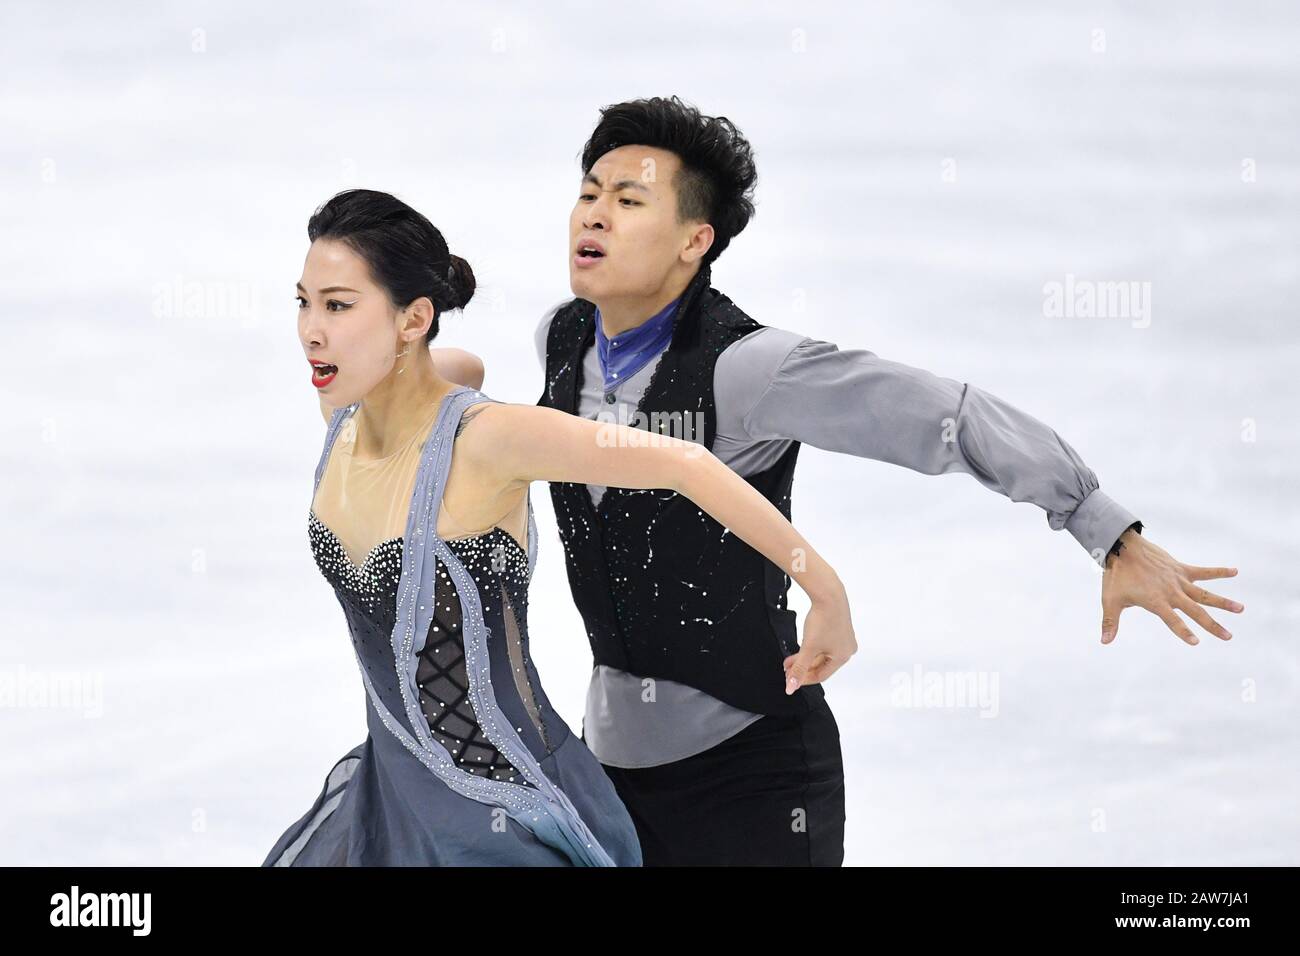 Seoul, South Korea. 7th Feb, 2020. Wanqi Ning & Chao Wang (CHN), February 7, 2020 - Figure Skating : ISU Four Continents Figure Skating Championships 2020, Ice Dance Free Dance at Mok-dong Ice Link in Seoul, South Korea. Credit: MATSUO.K/AFLO SPORT/Alamy Live News Stock Photo